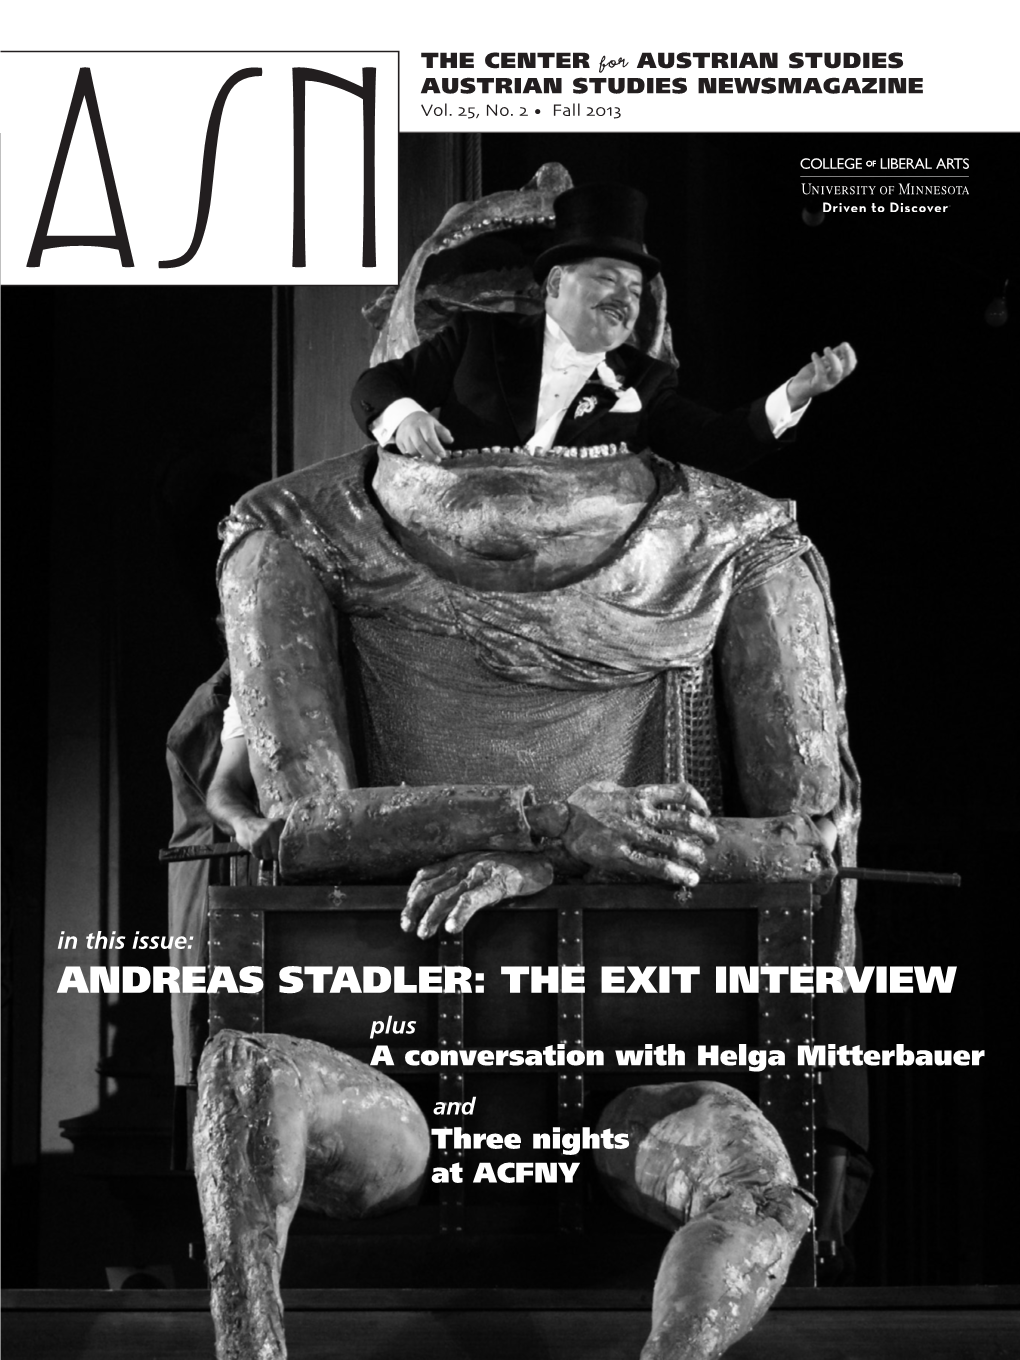 ANDREAS STADLER: the EXIT INTERVIEW Plus a Conversation with Helga Mitterbauer